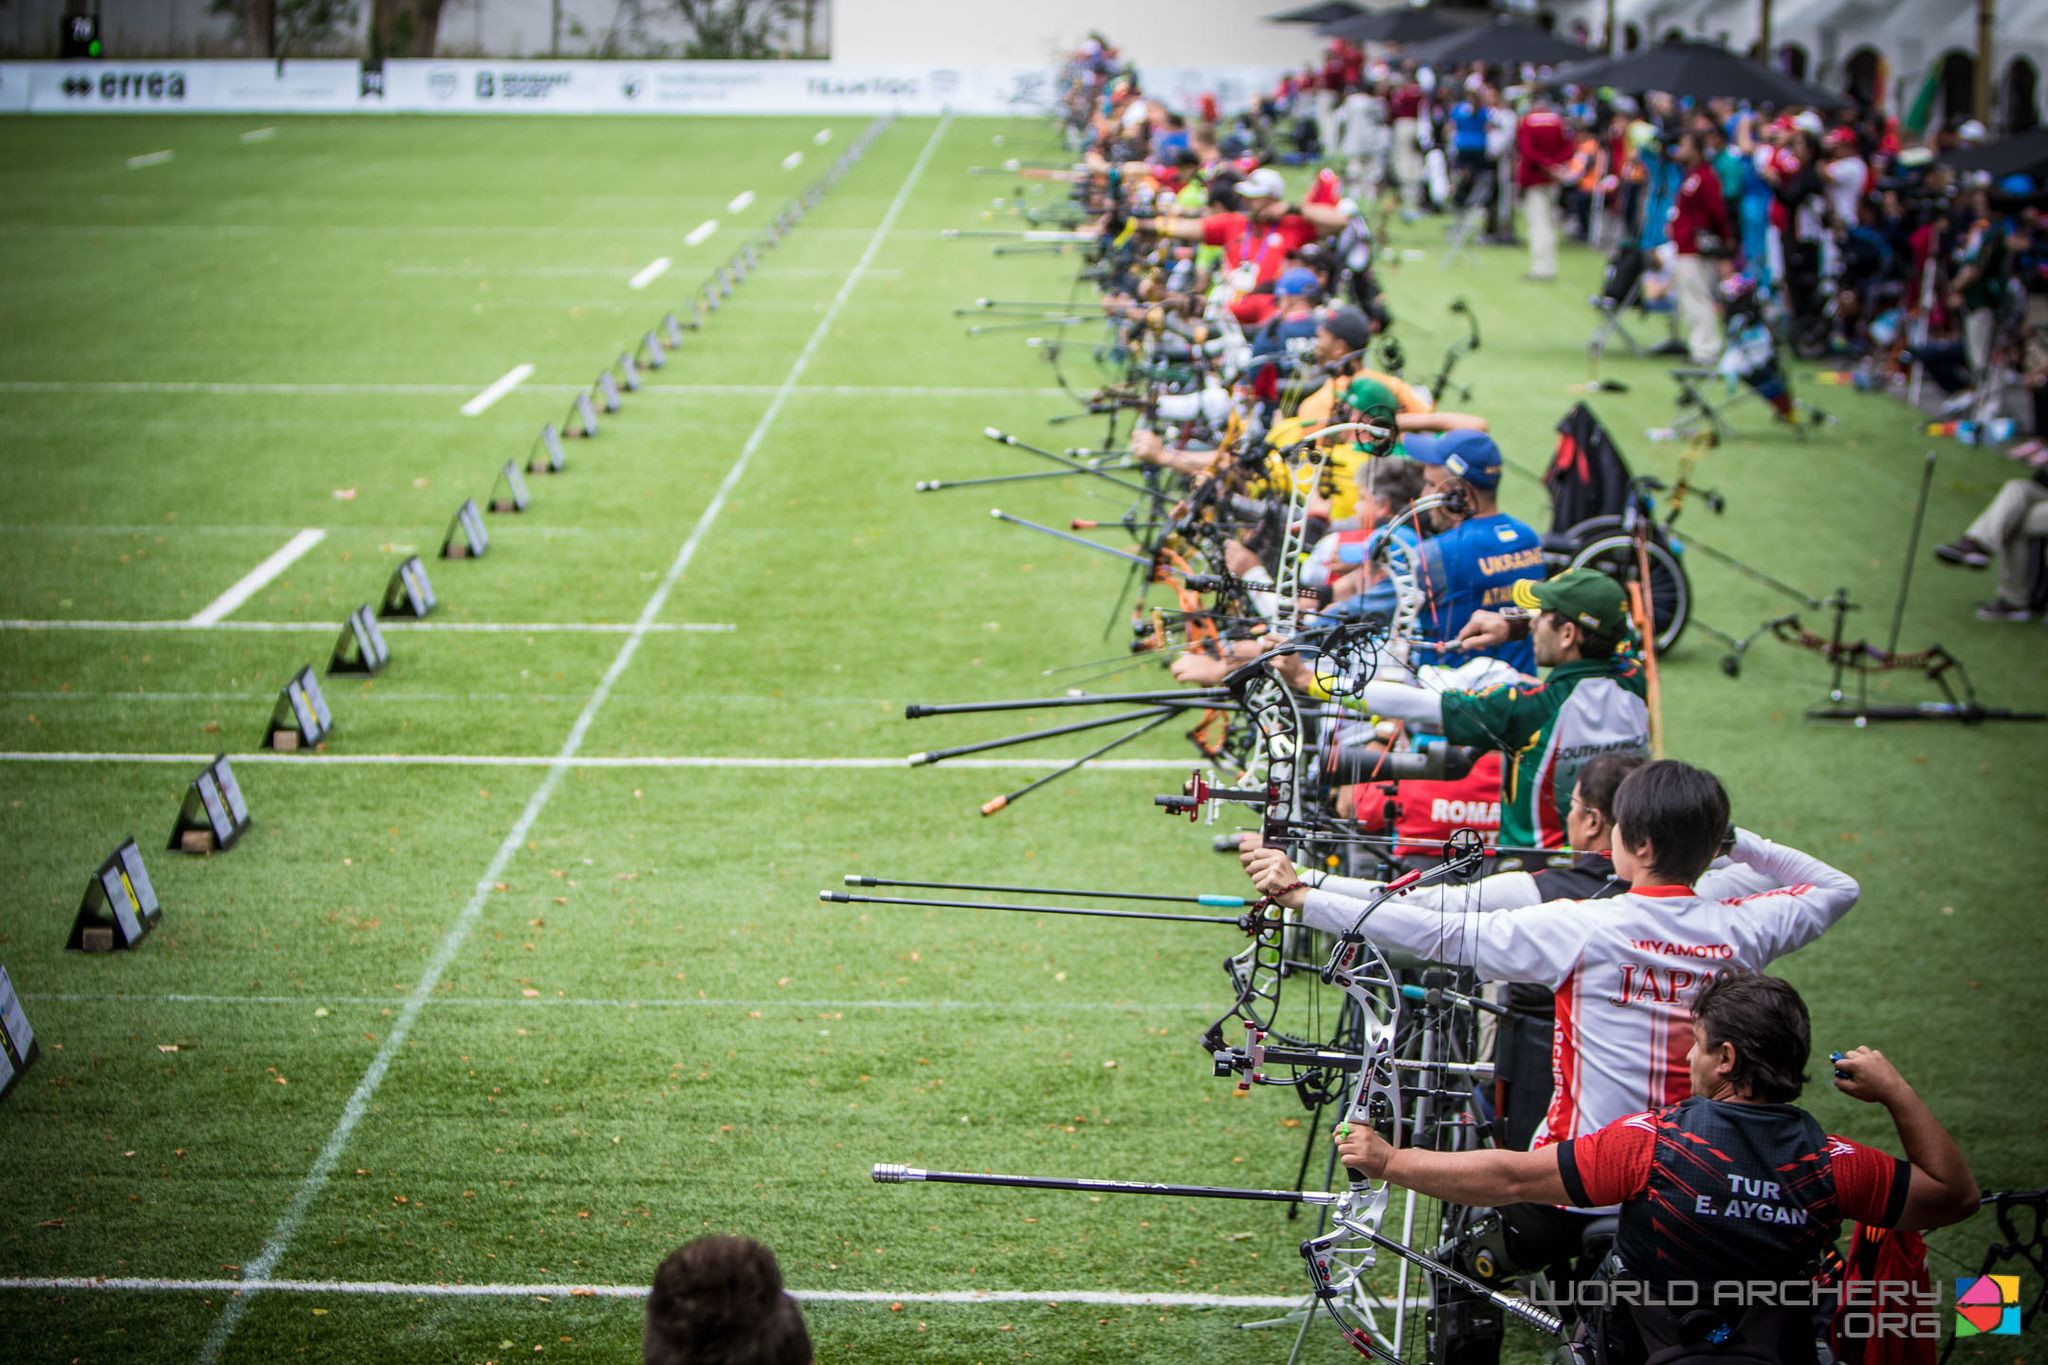 World records for Ukraine and China in team matchplay at World Archery Para Championships in the Netherlands 